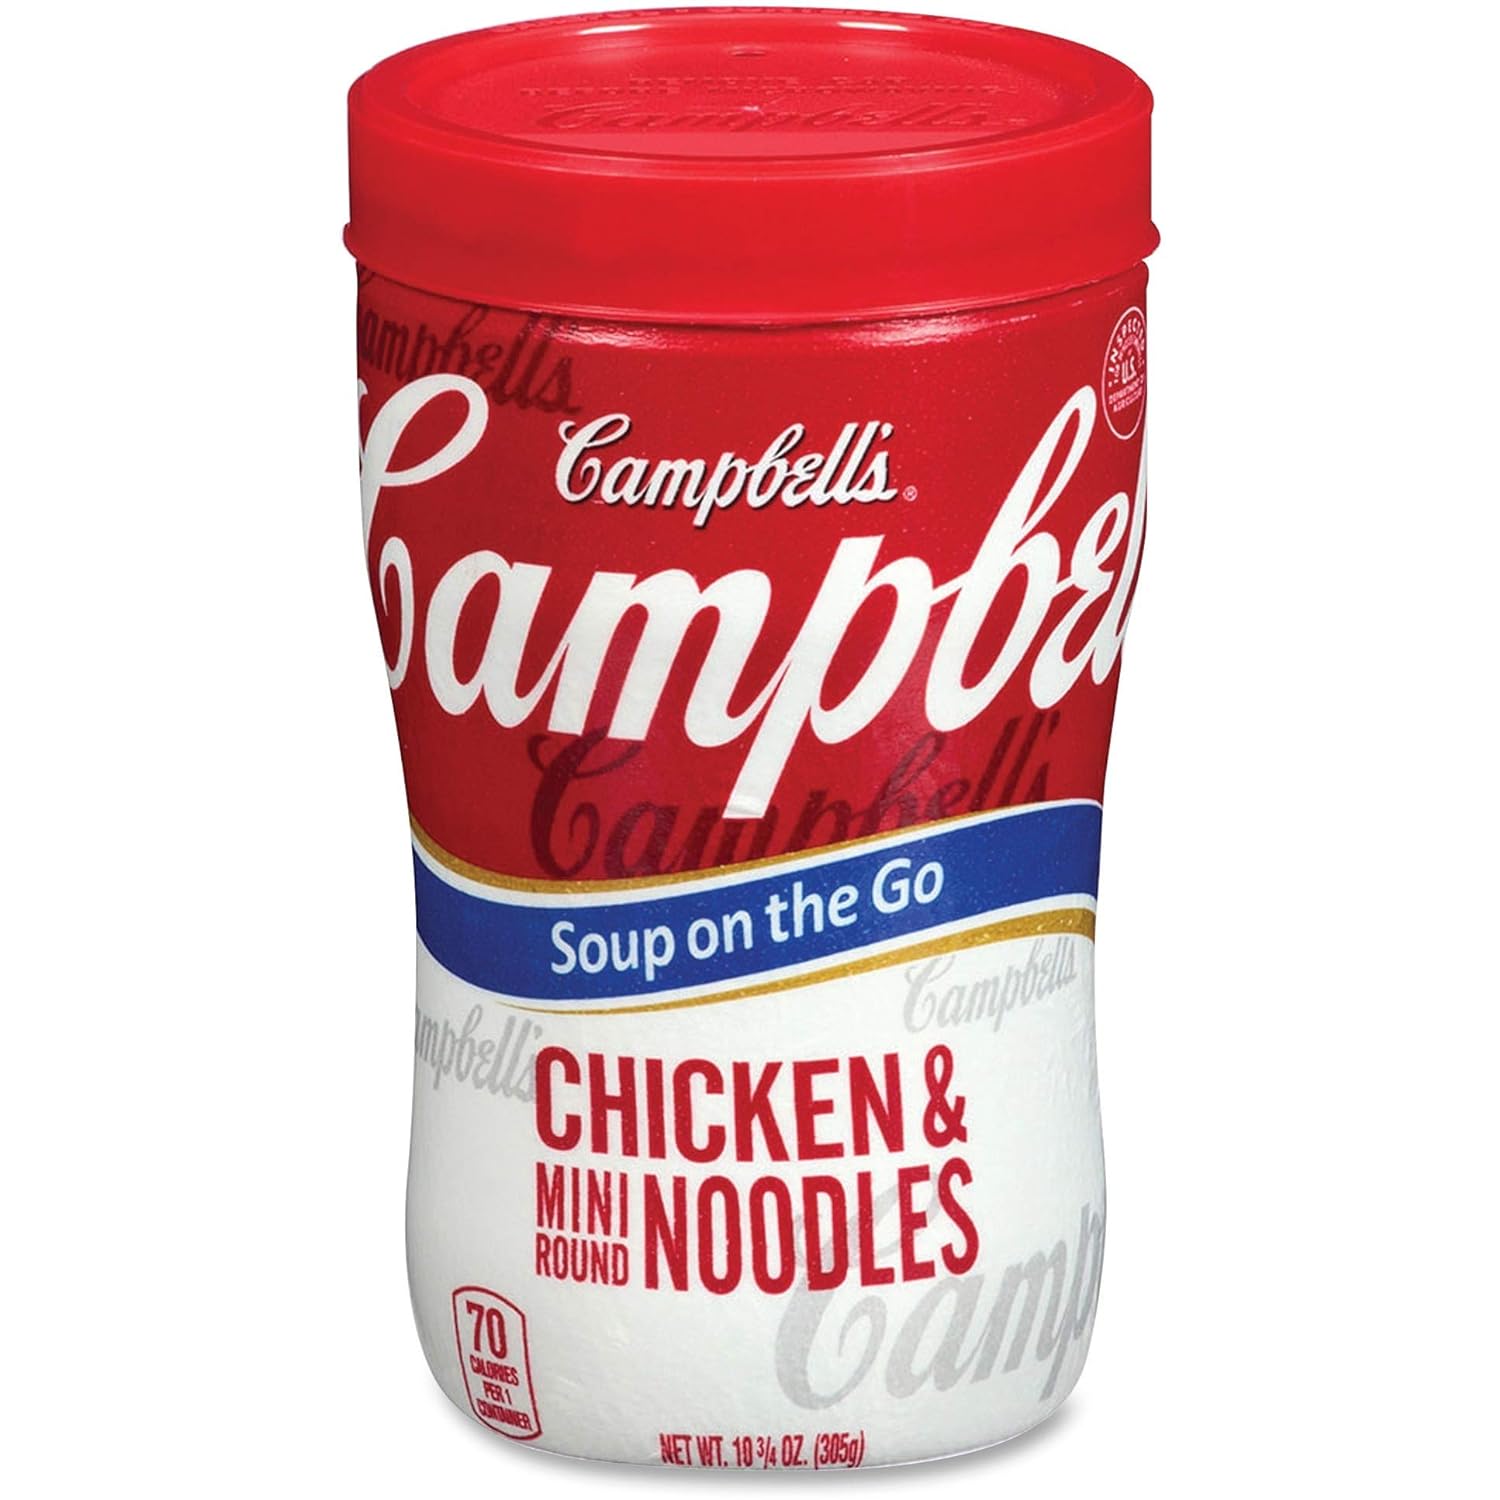 Campbell's Chicken Soup with Mini Noodles Soup at Hand 10.75 Oz Cup